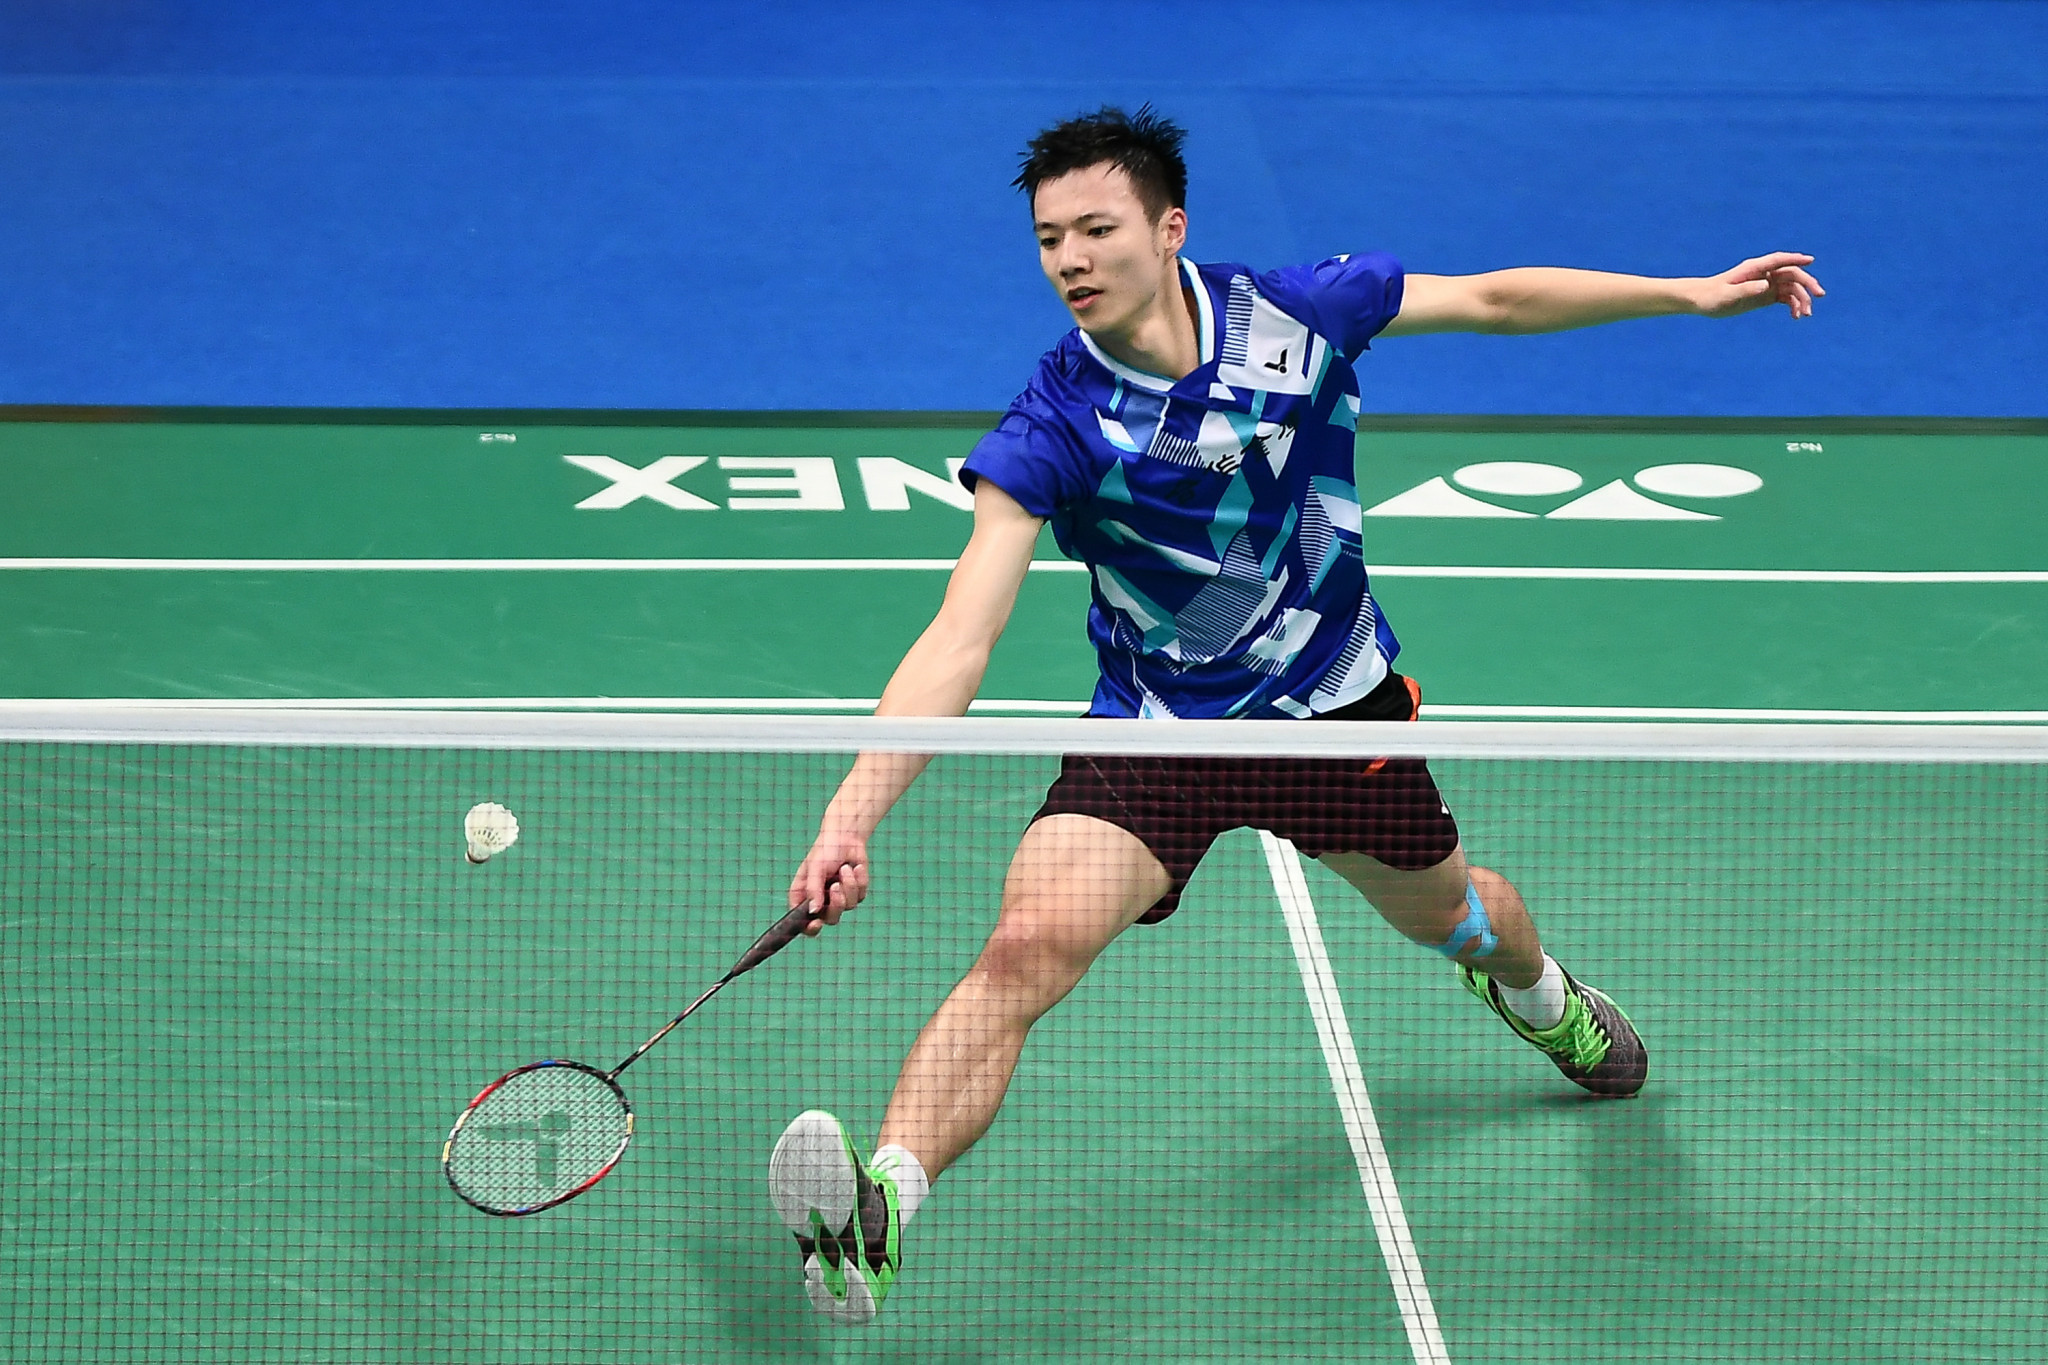 Top seed Wang through to last eight at BWF Dutch Open